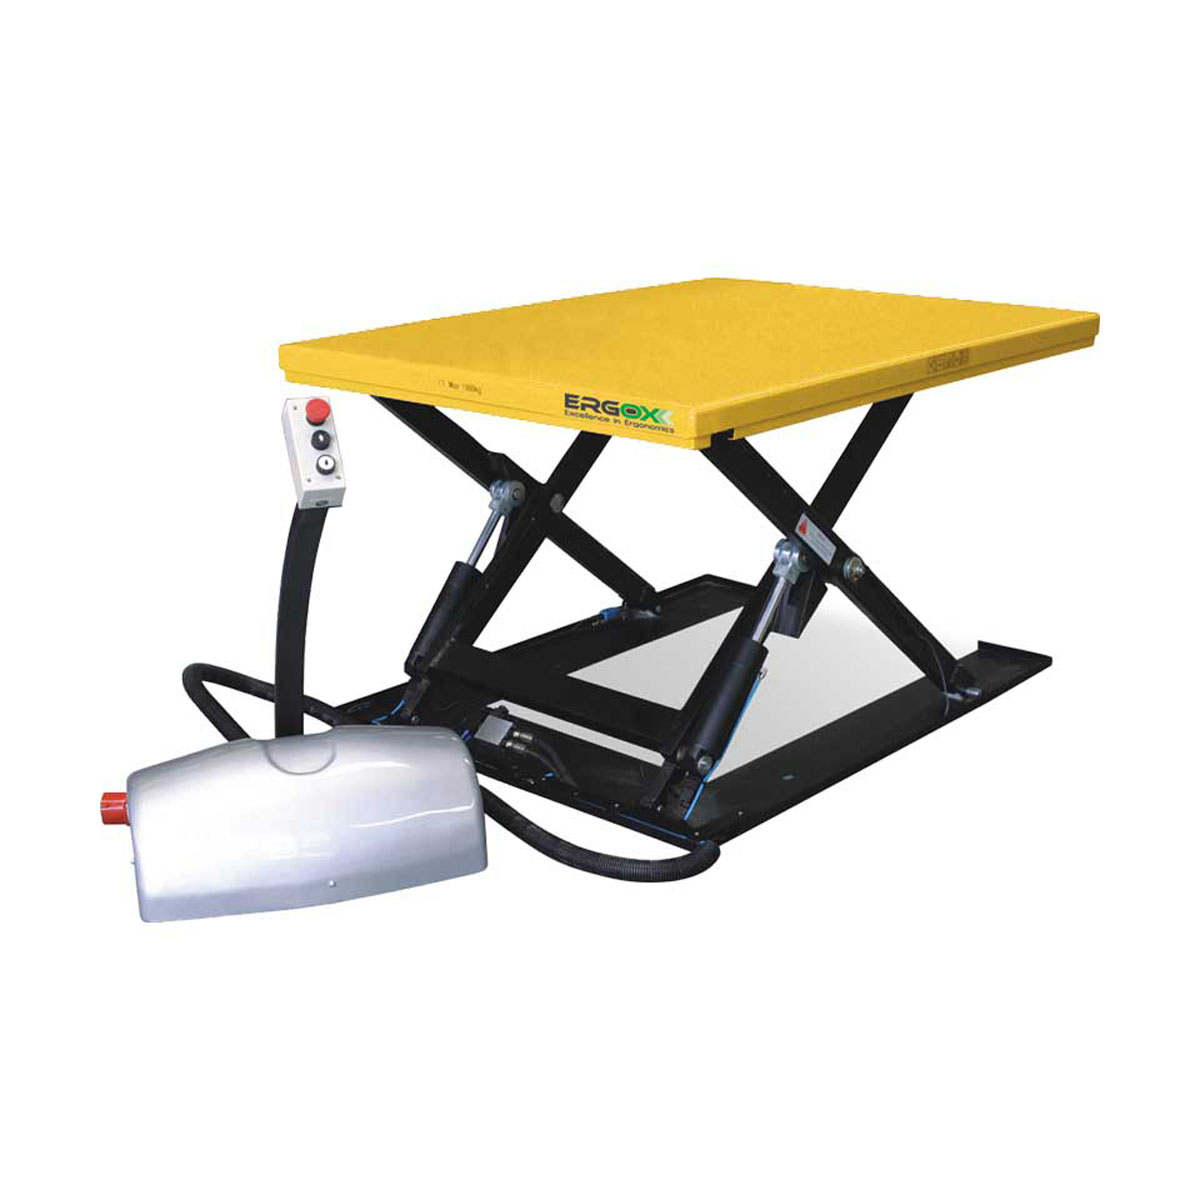 Buy Scissor Lift Table Low Entry-Level (Electric) in Scissor Lift Tables from Astrolift NZ